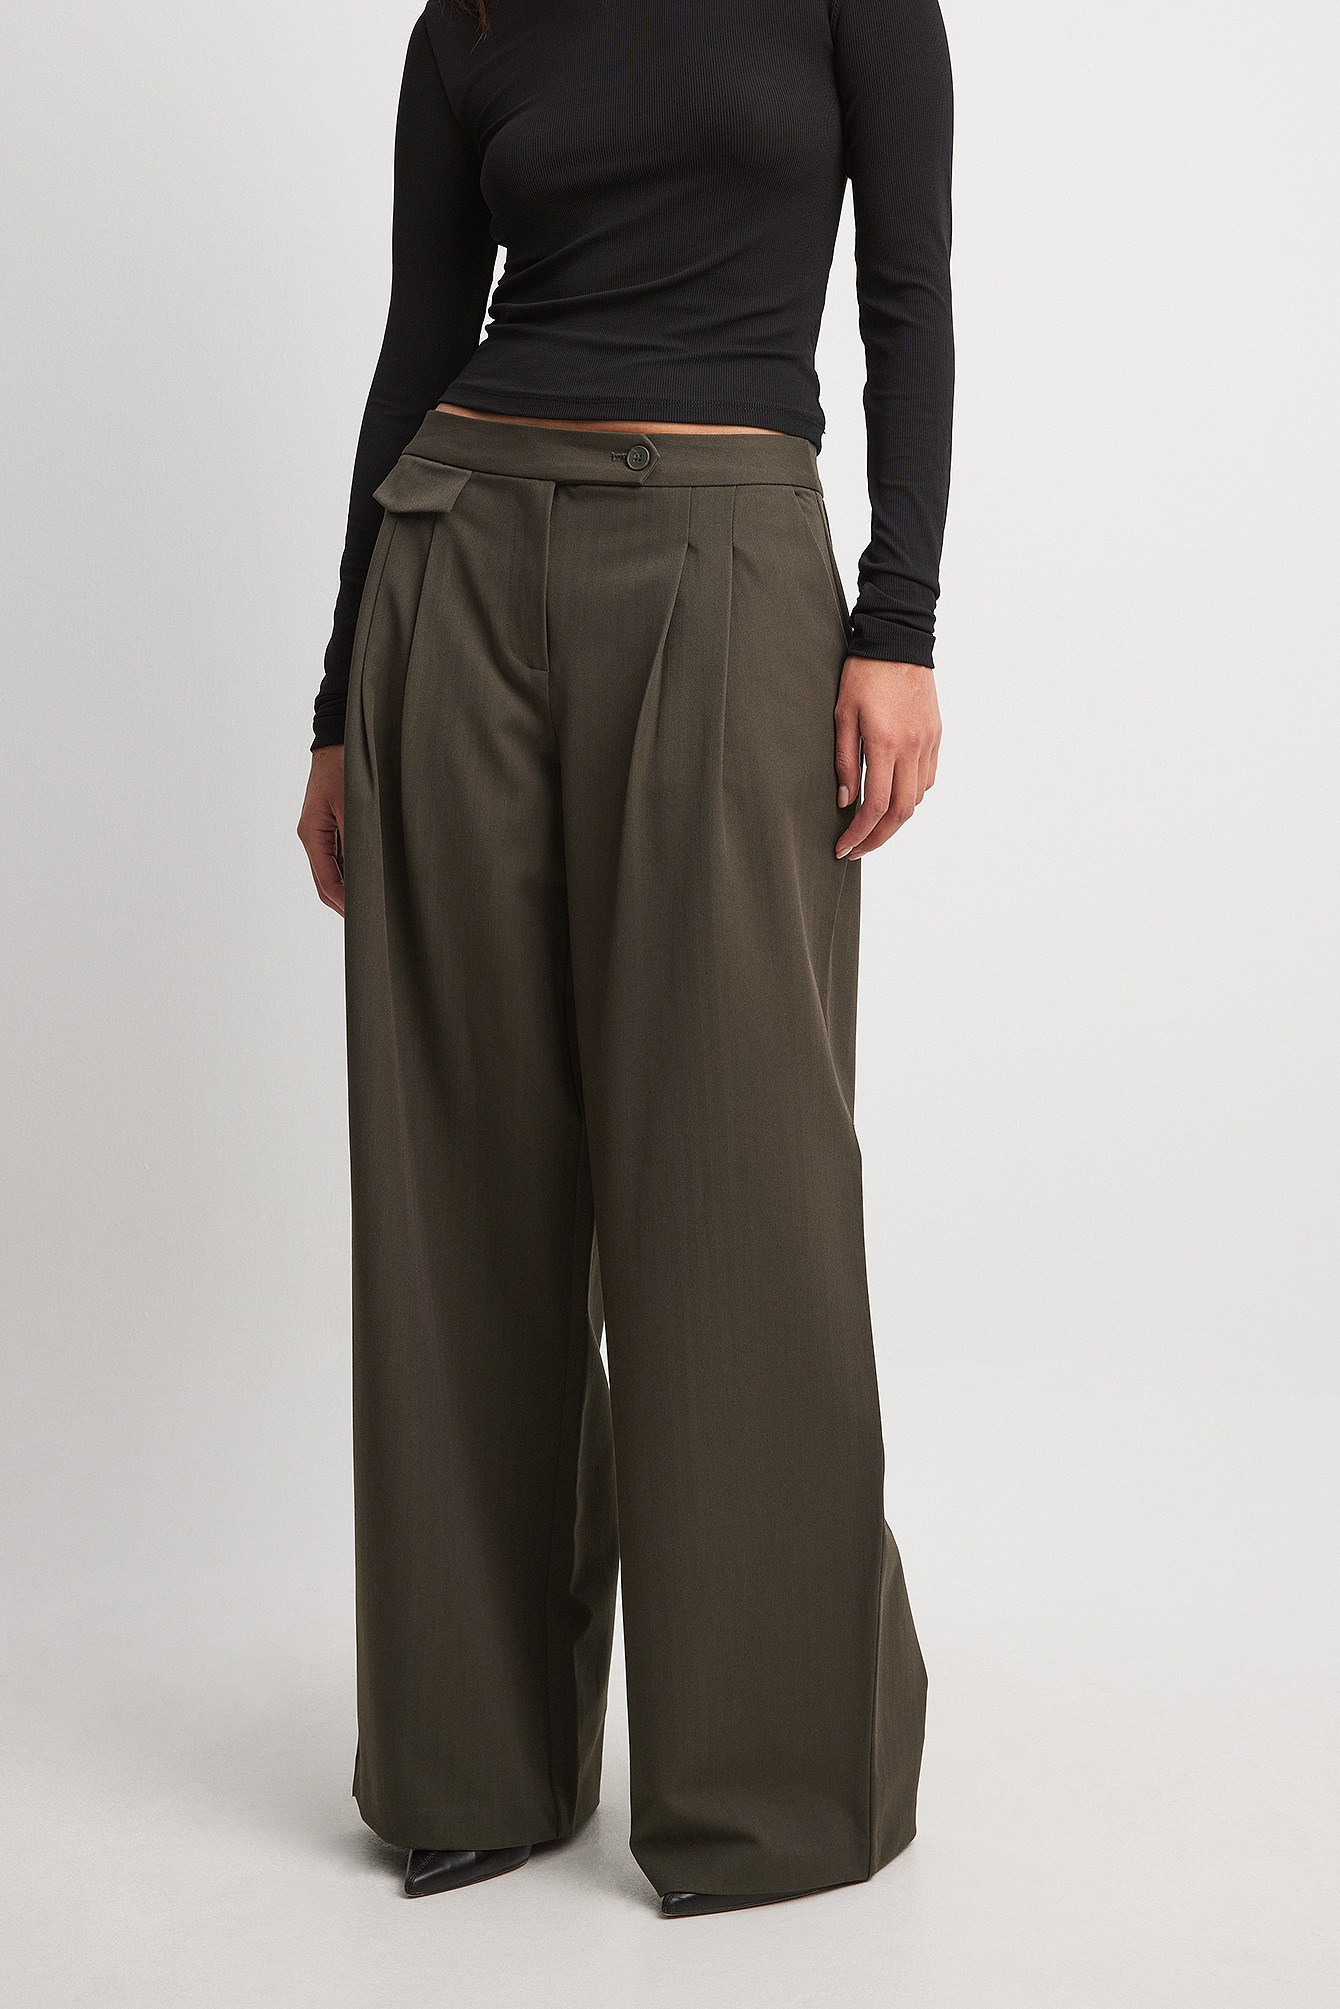 5th Avenue Solid Pleated Dress Pants In Oatmeal (Small to Large) – AllyOops  Boutique